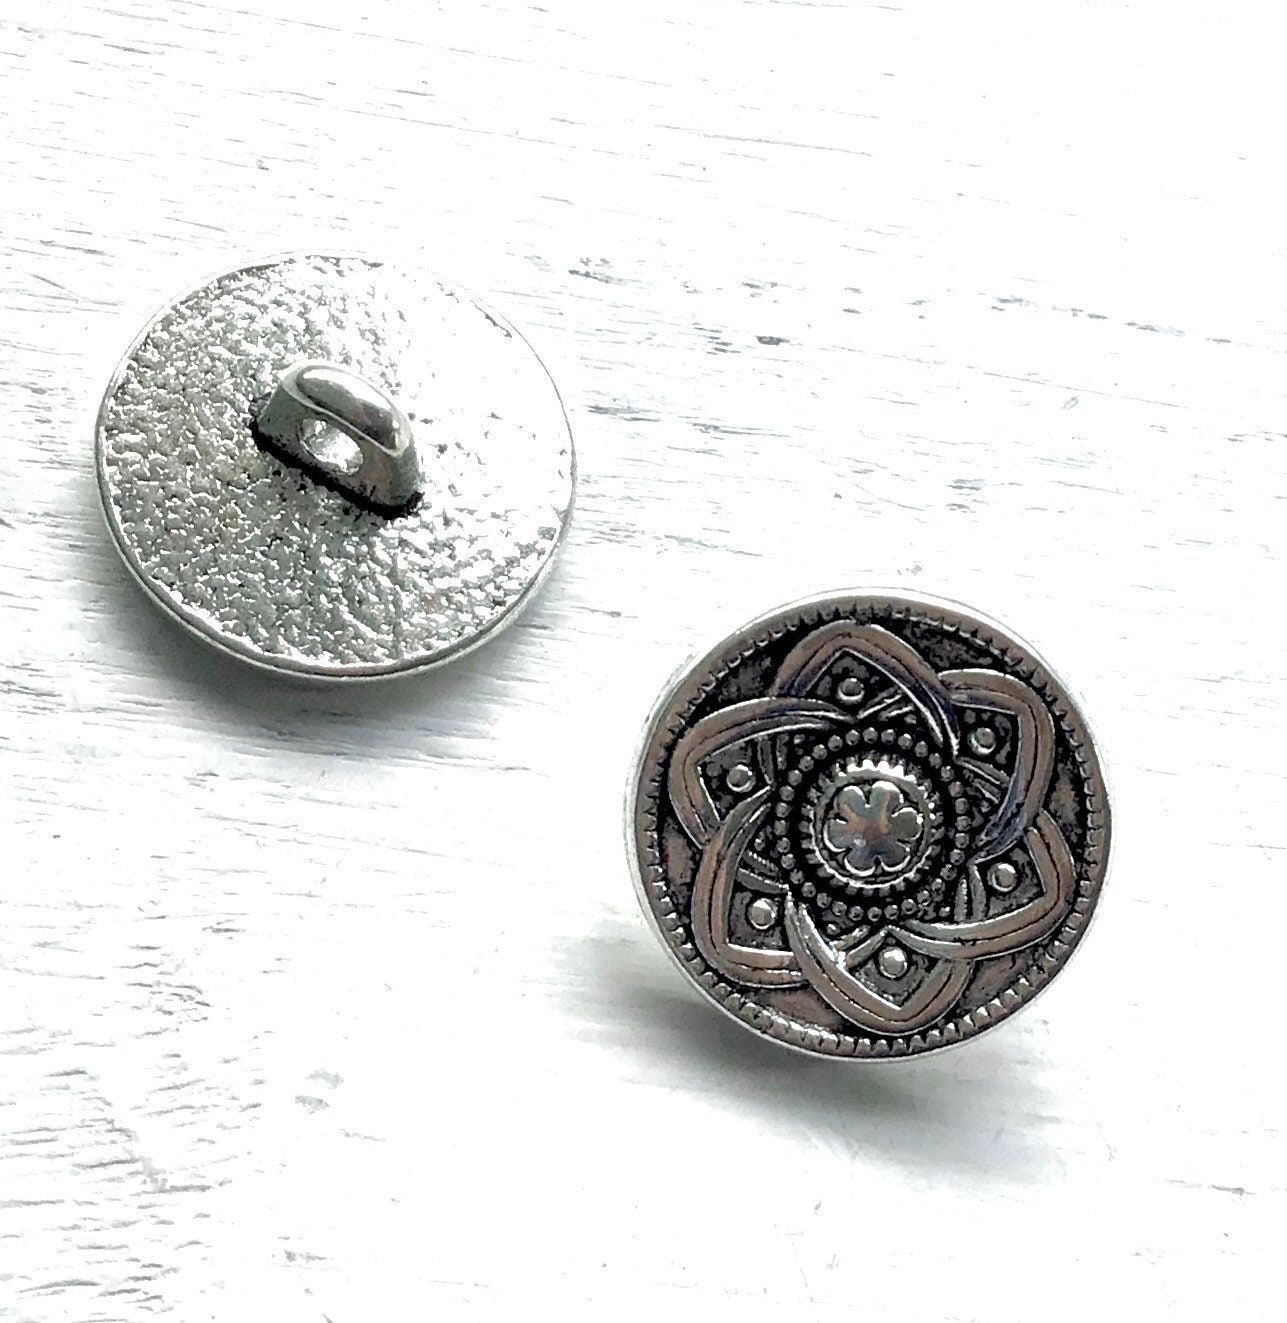 3 Rustic Metal Heart Buttons Matte Antique Silver Plated - Round Silver  Buttons, Metal Shank Button, Sewing Buttons, Jewelry Making Buttons